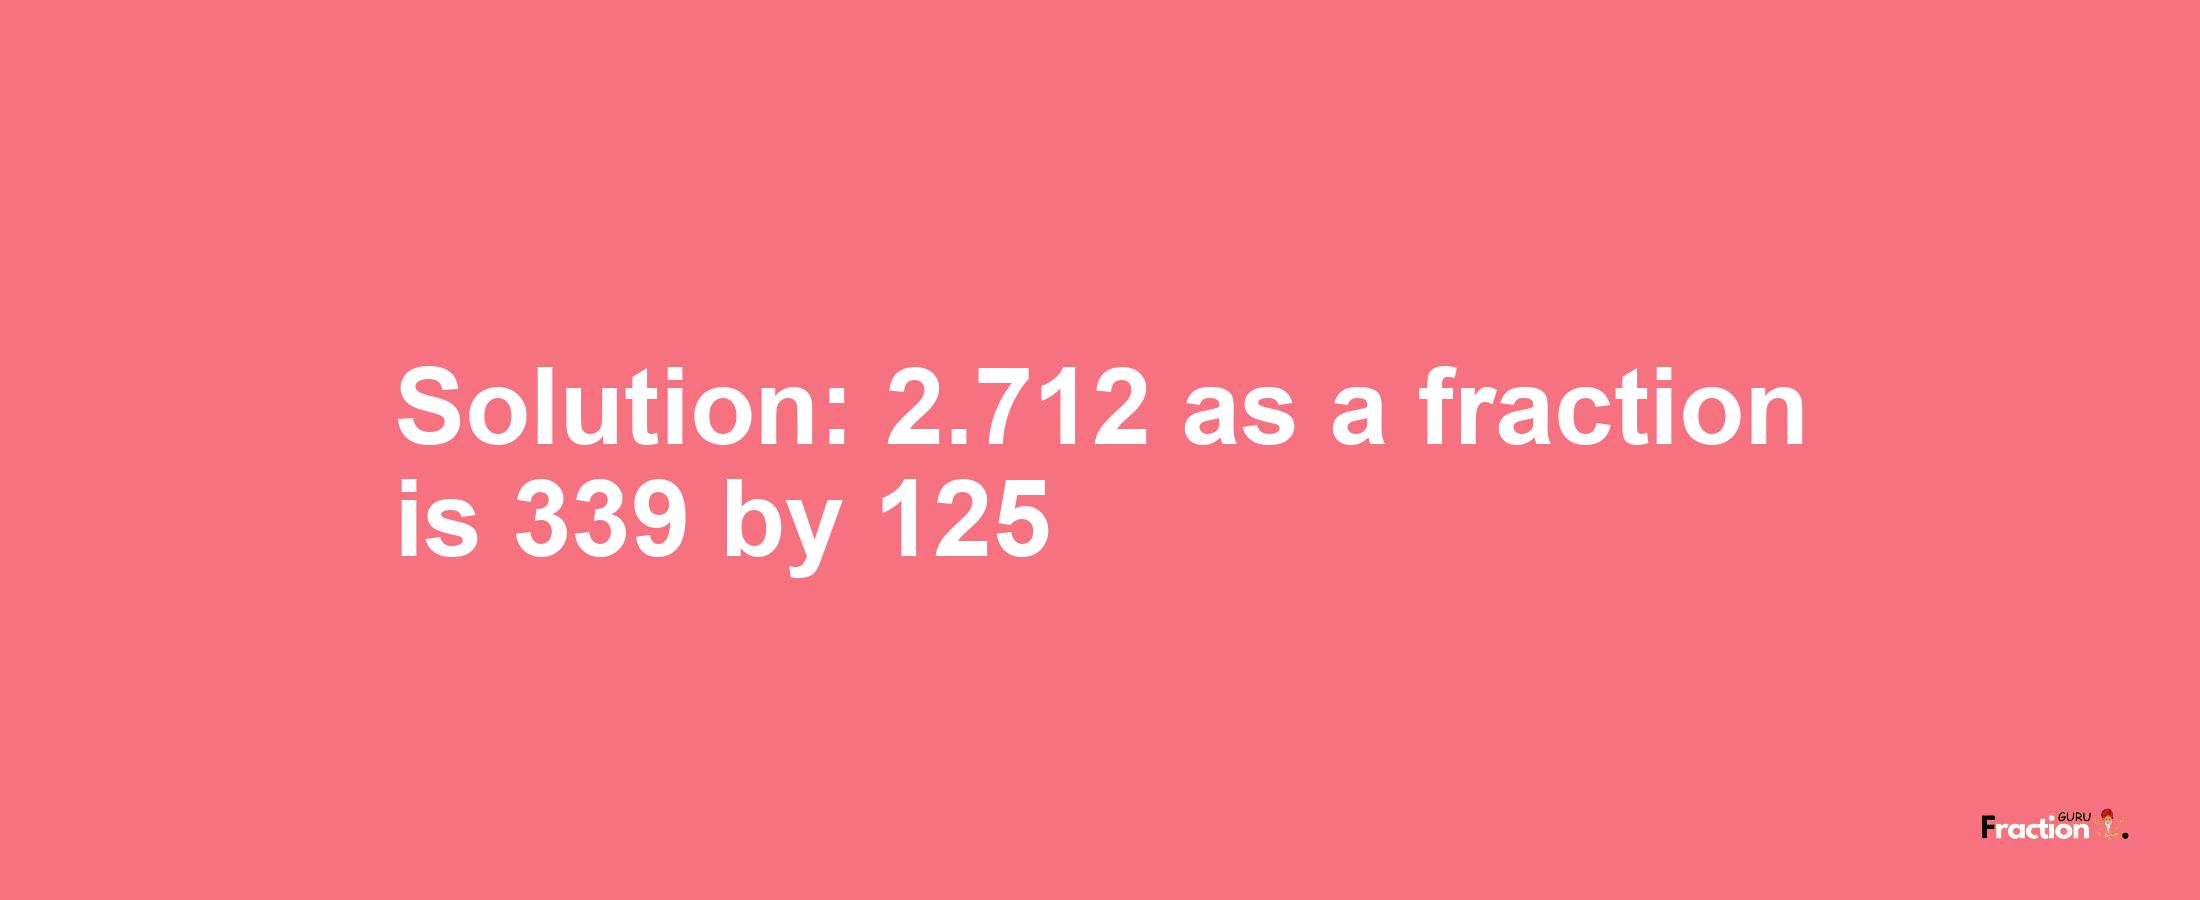 Solution:2.712 as a fraction is 339/125